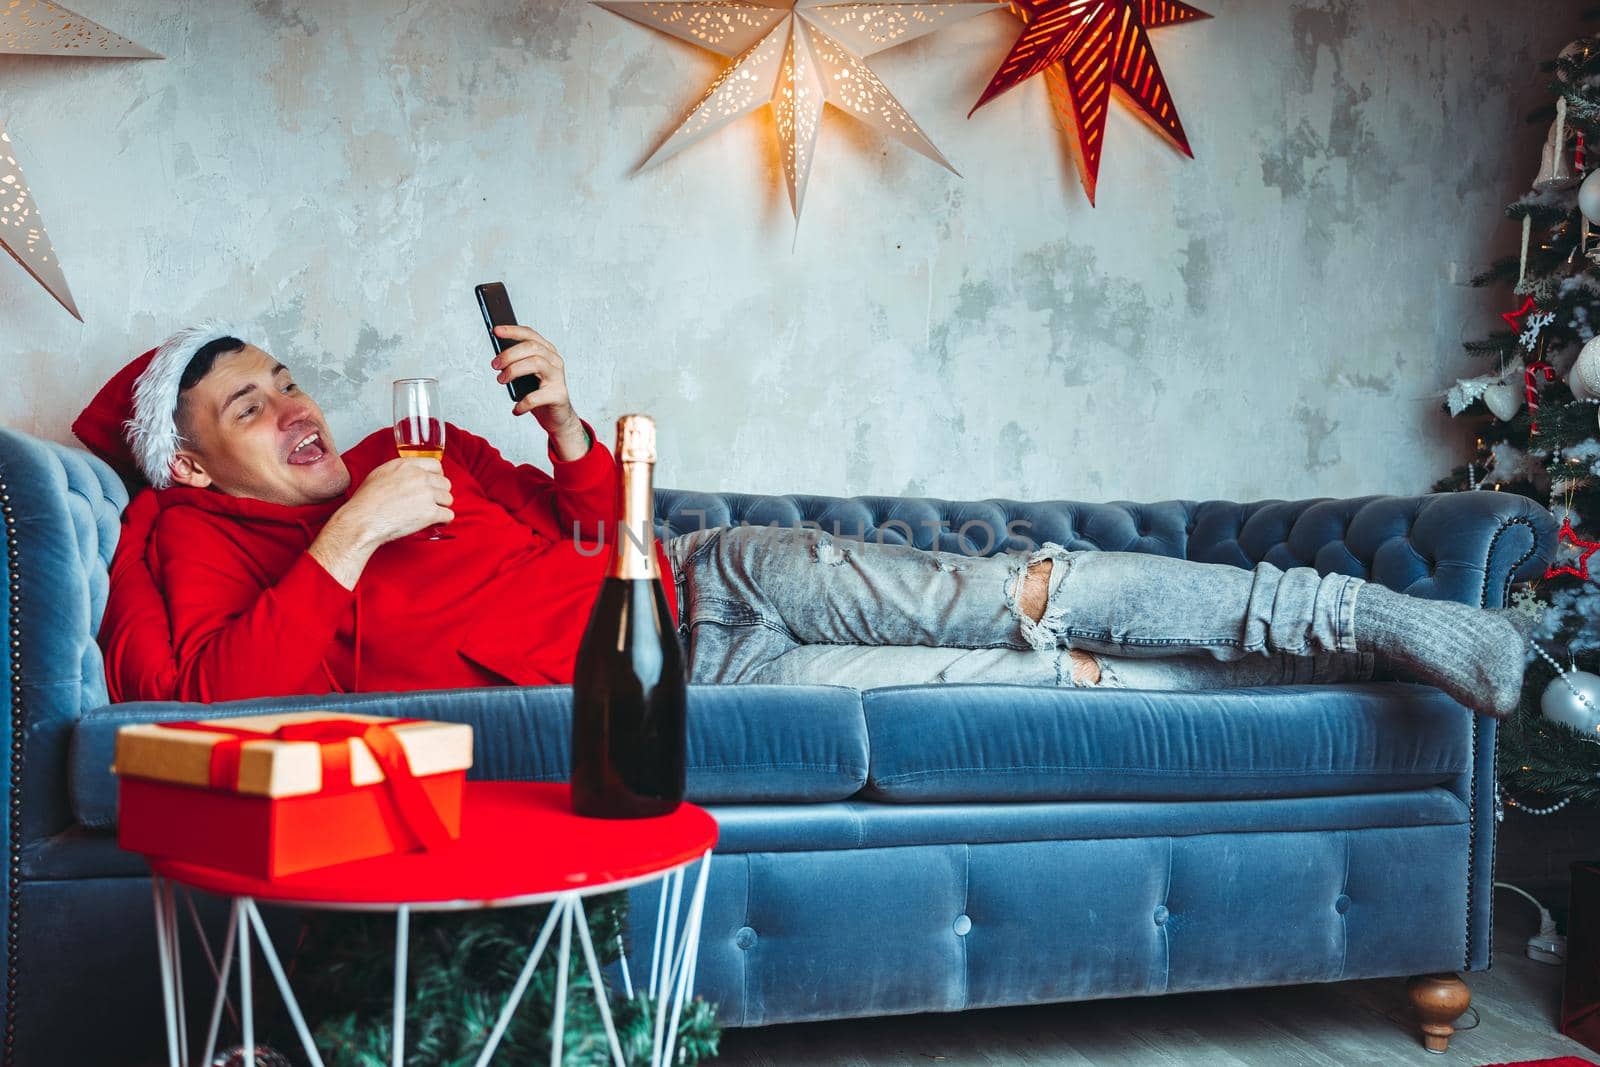 Young man in Santa Claus hat browses smartphone and drinks champagne, lying on couch. Handsome guy resting with mobile phone and alcohol. Concept of Christmas celebration at home. by epidemiks